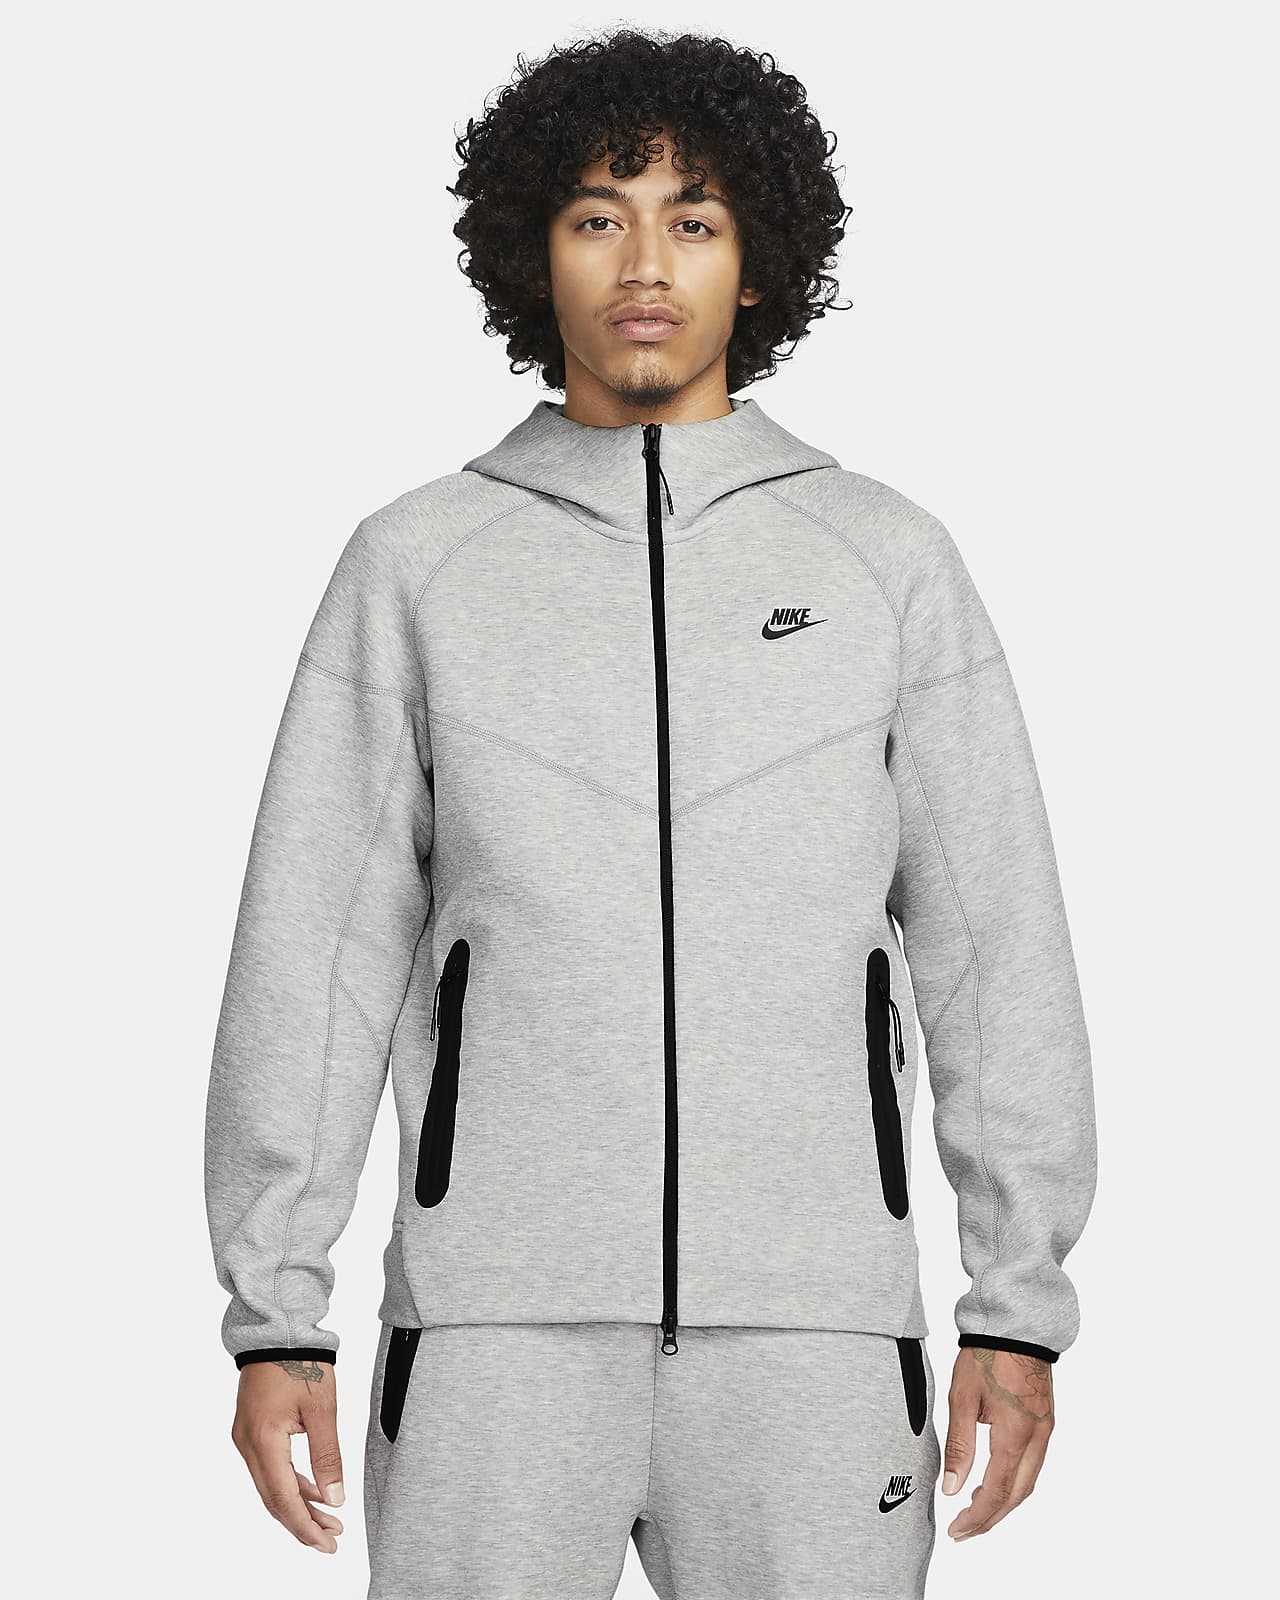 https://static.nike.com/a/images/t_PDP_1280_v1/f_auto,q_auto:eco/5a03f66d-7f9d-45bb-a136-a5d839a950c9/sportswear-tech-fleece-windrunner-hoodie-XGC5Gr.png